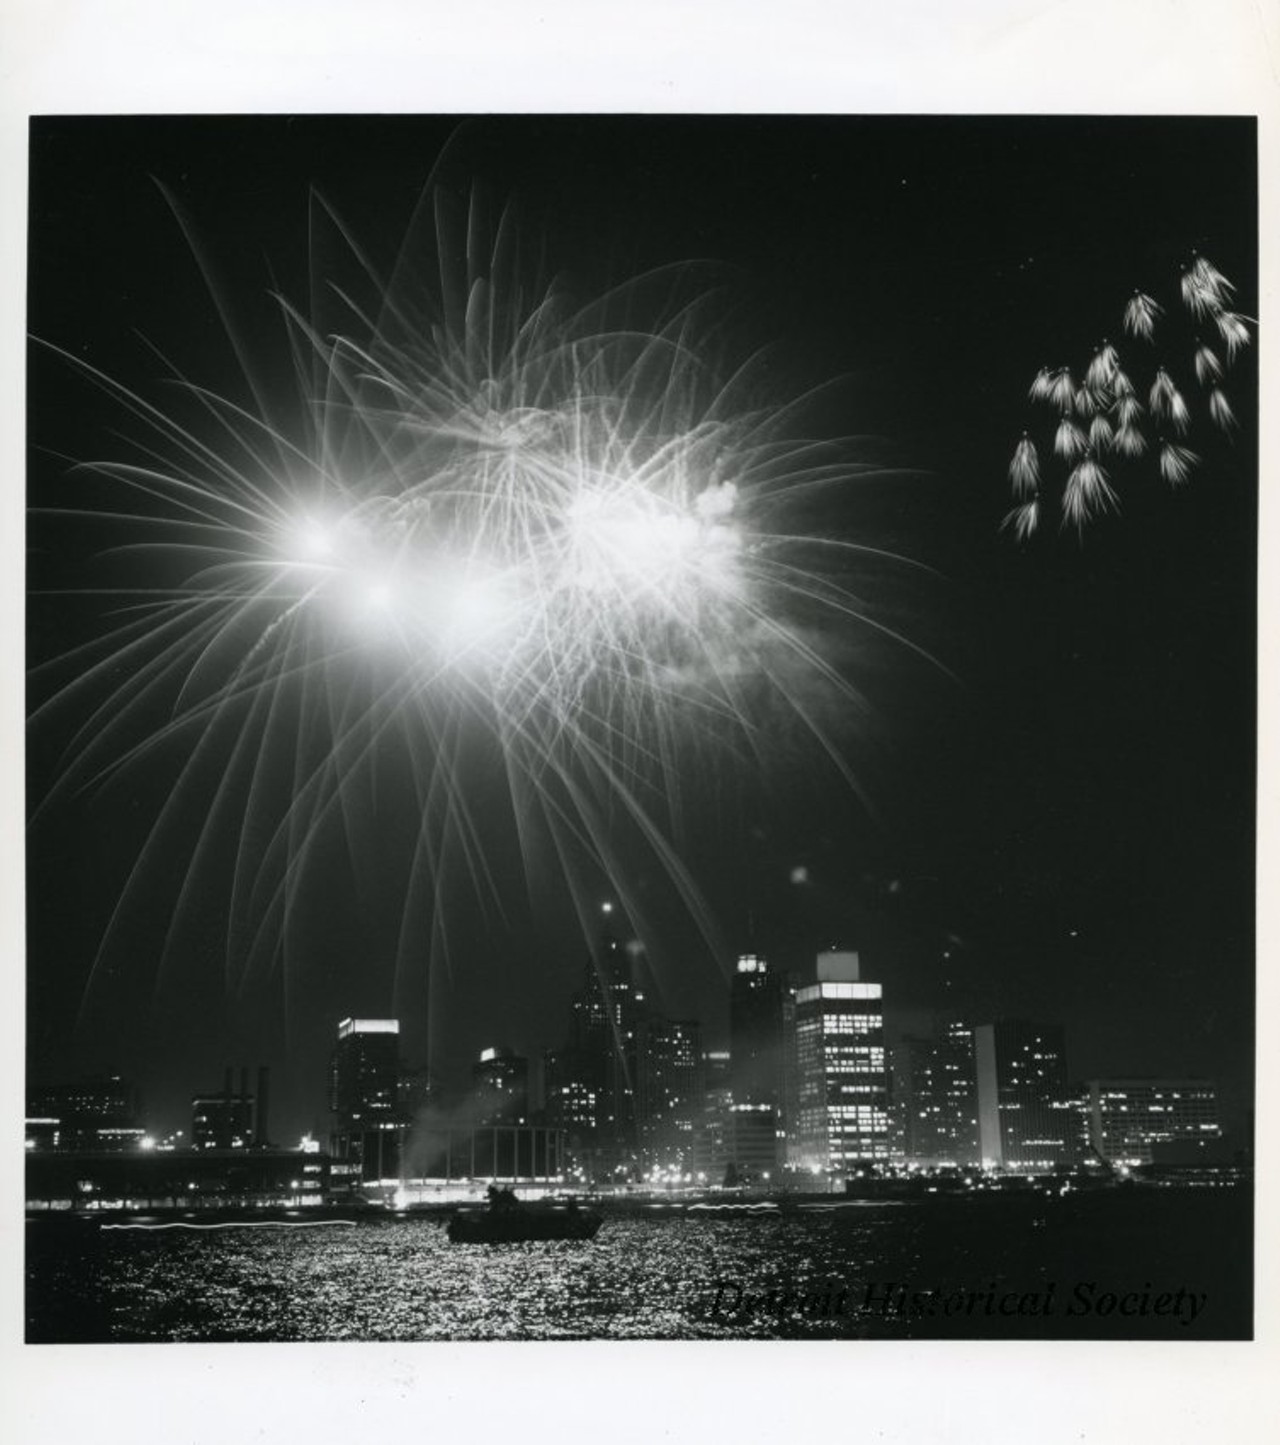 "Black and white photographic print depicting a fireworks display over the Detroit River at night, with the downtown skyline in the background. In view are Cobo Center, Detroit Bank and Trust Tower, One Woodward Avenue, and City-County Building."